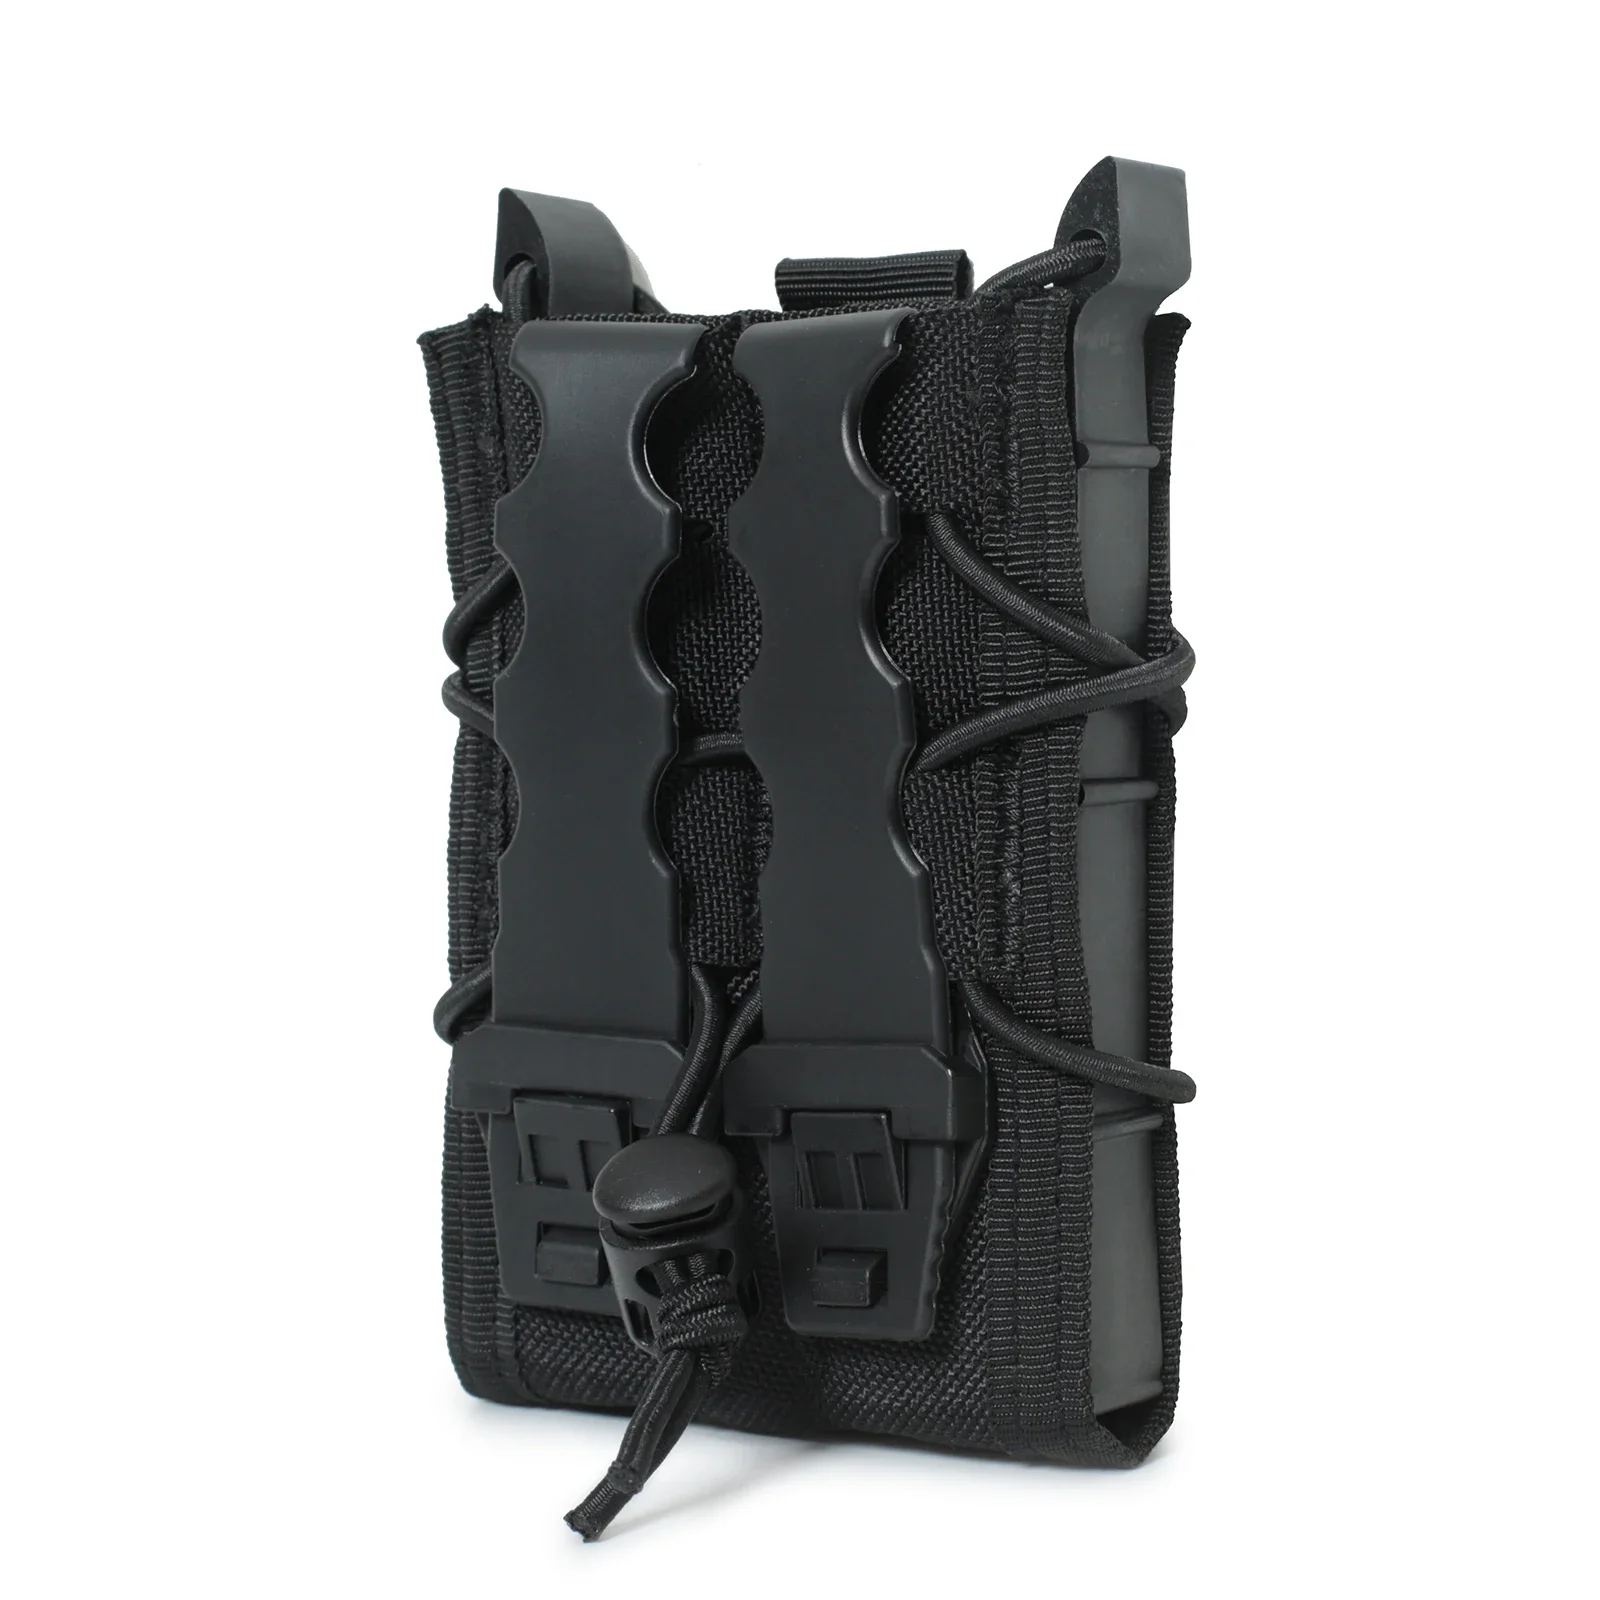 Tactical 5.56 M4 Molle Single Magazine Pouch AK AR AR15 Rifle Mag Holster Military Airsoft Paintball Hunting EDC Tool Waist Bag